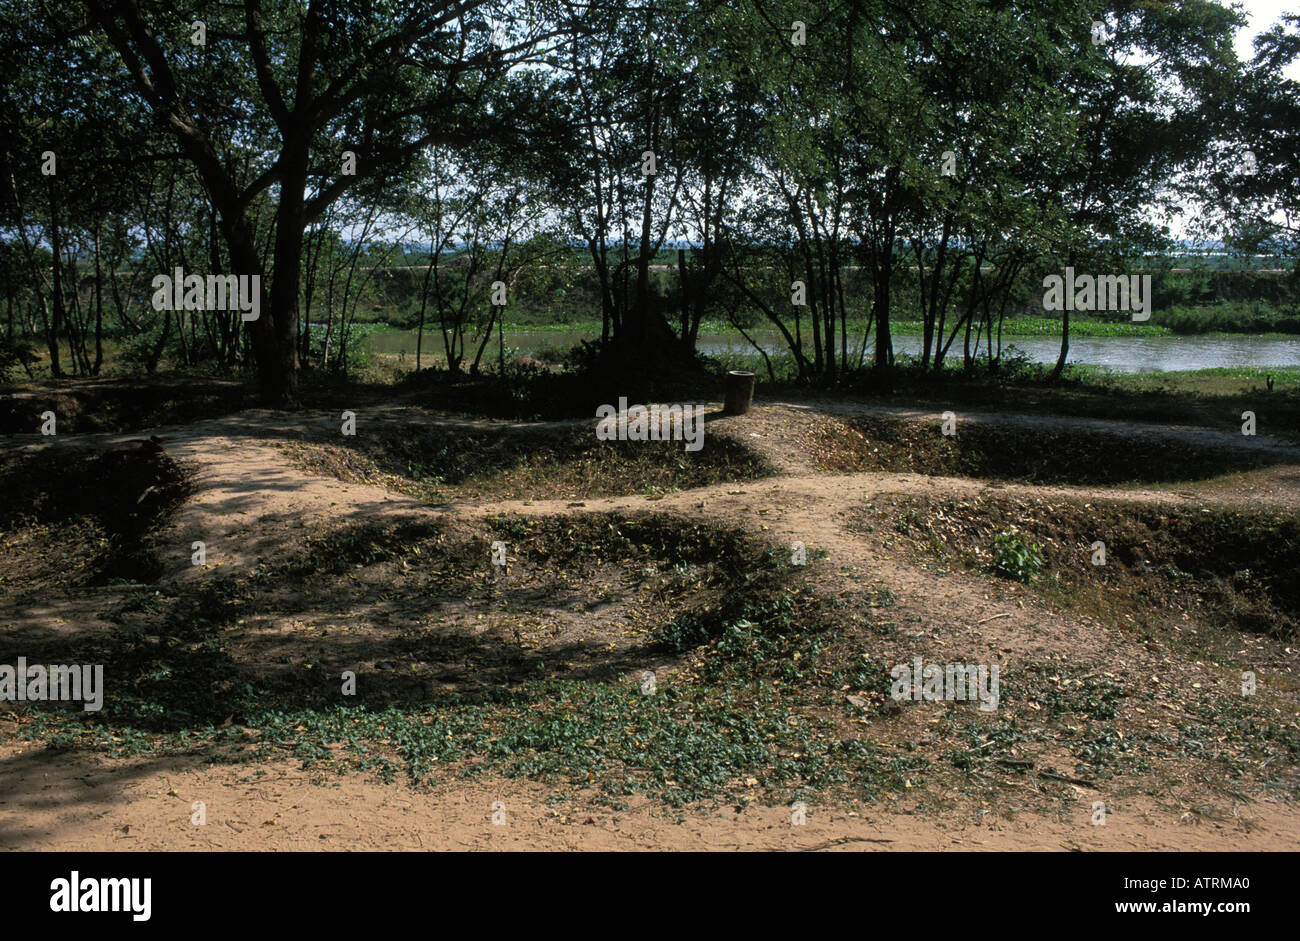 The killing fields of Choeung Ek were victims of the Pol Pot regime lie buried in mass graves Stock Photo